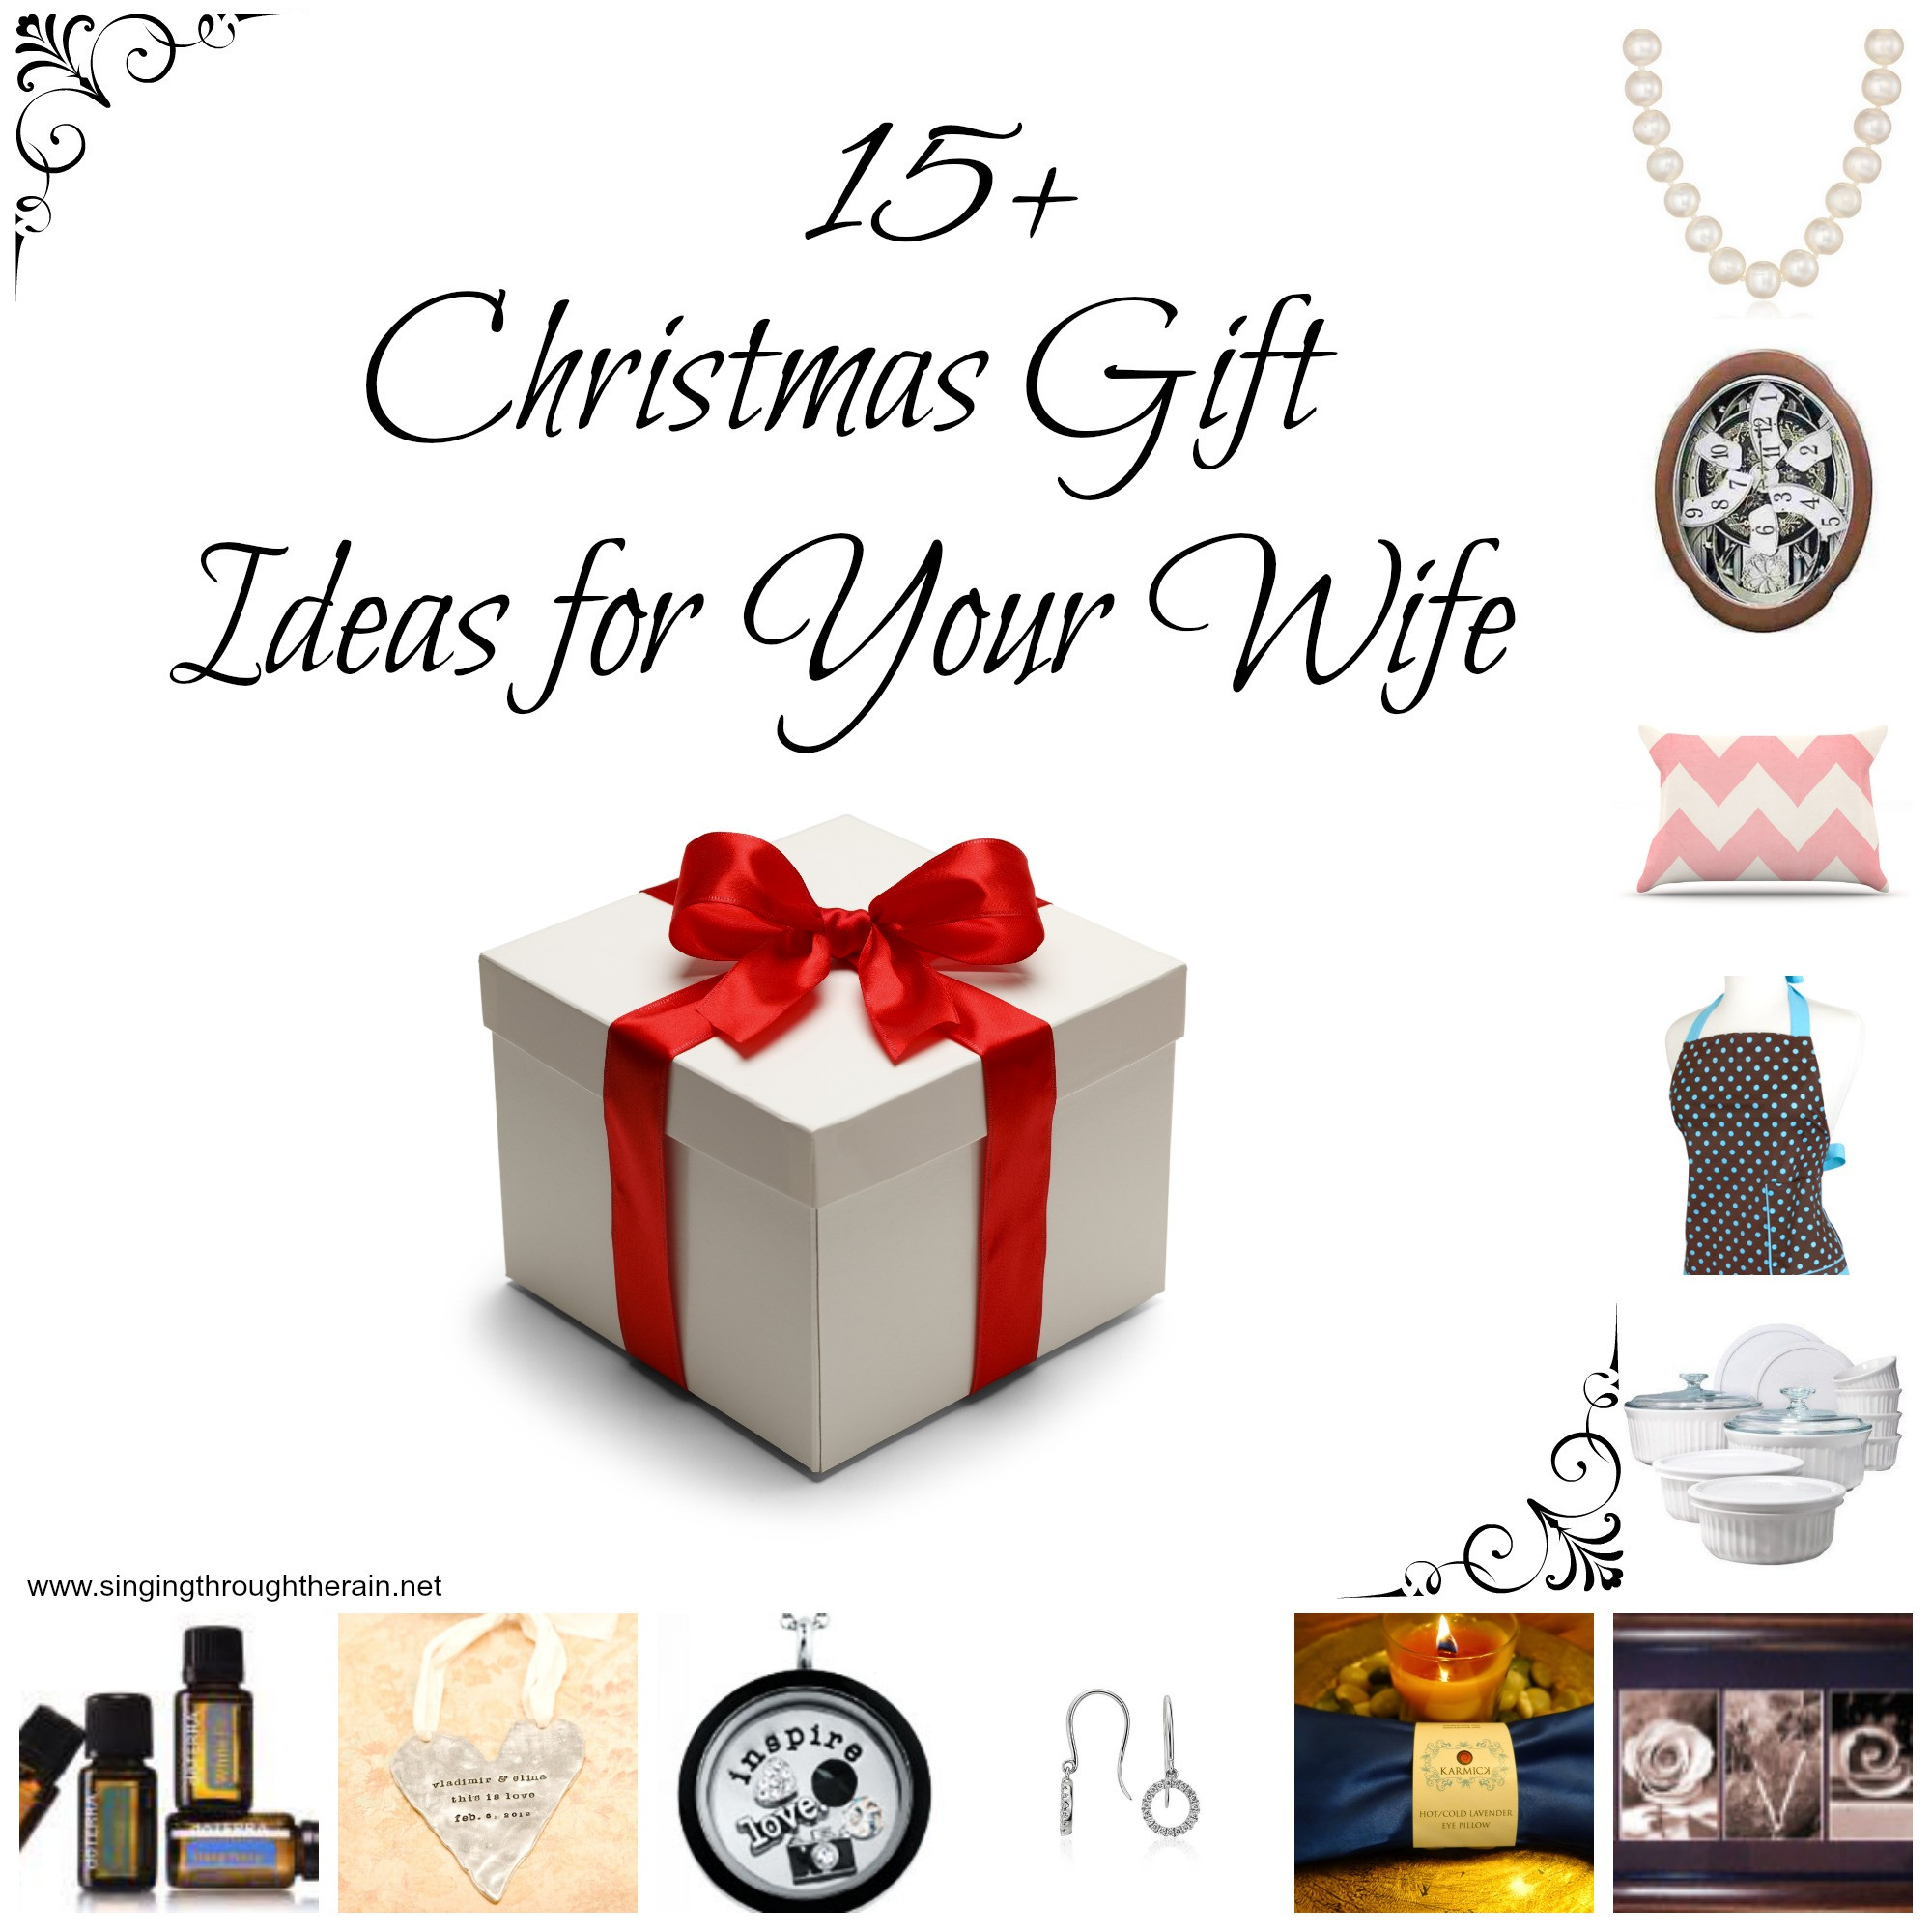 Holiday Gift Ideas For Wife
 15 Christmas Gift Ideas for Your Wife